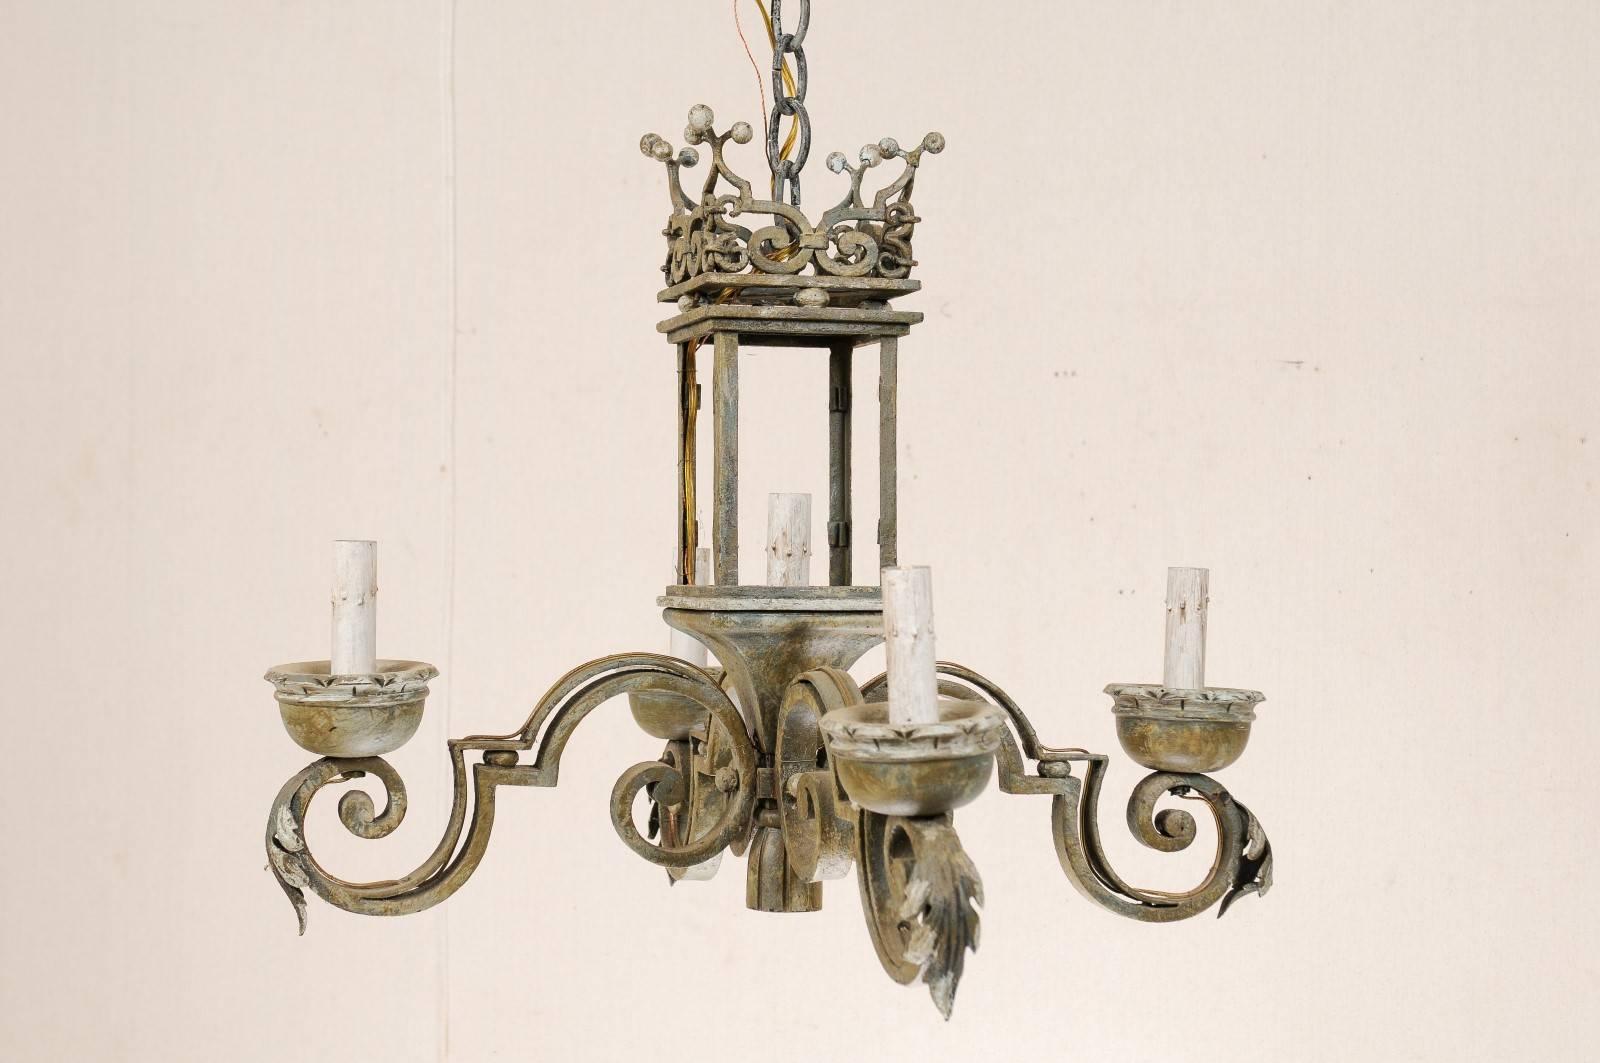 Italian Chandelier with Regal Crown at the Top, Hand-Forged Iron & Painted Wood 1